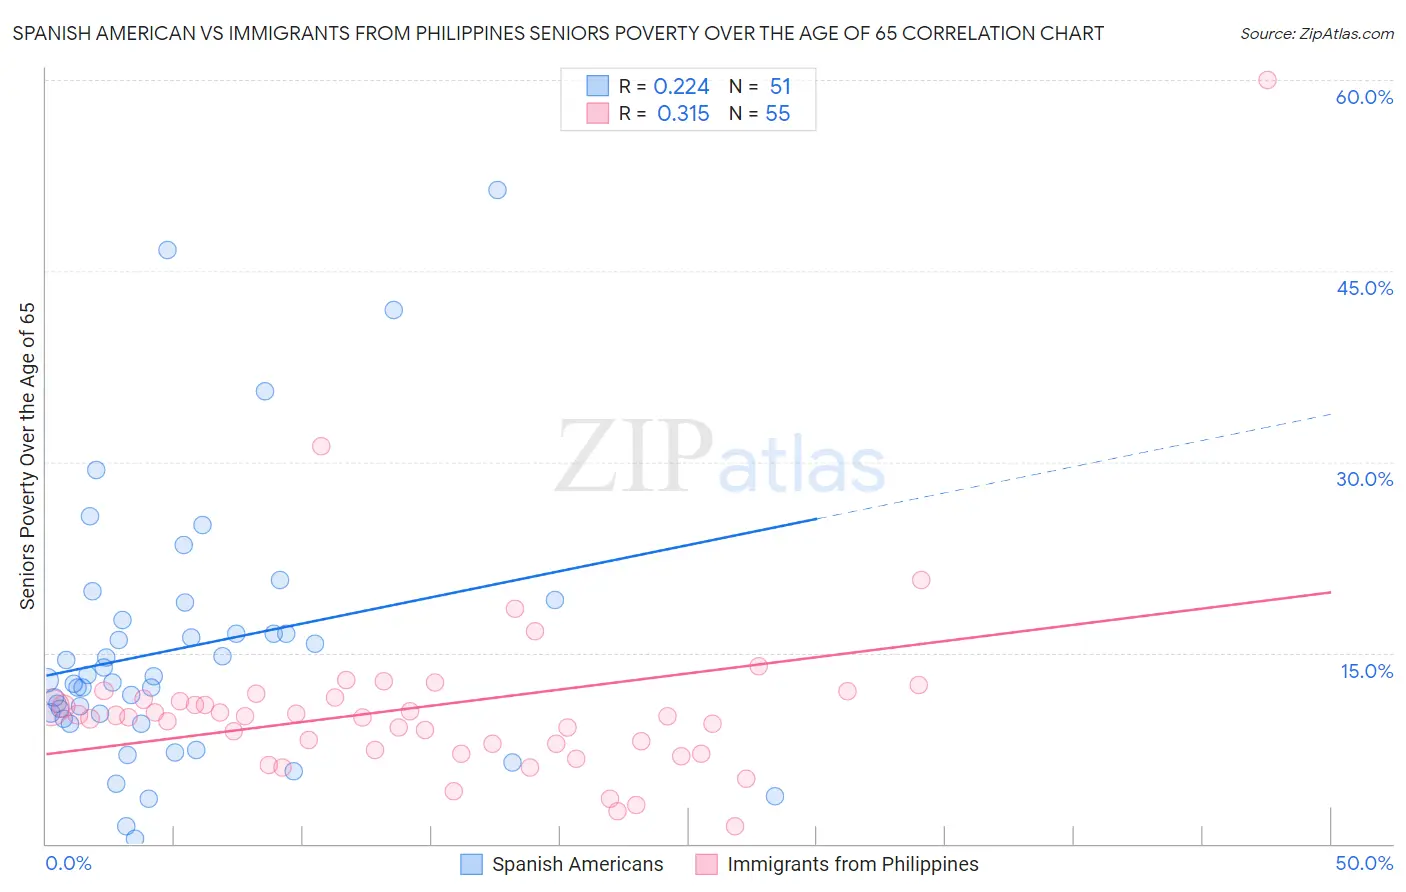 Spanish American vs Immigrants from Philippines Seniors Poverty Over the Age of 65